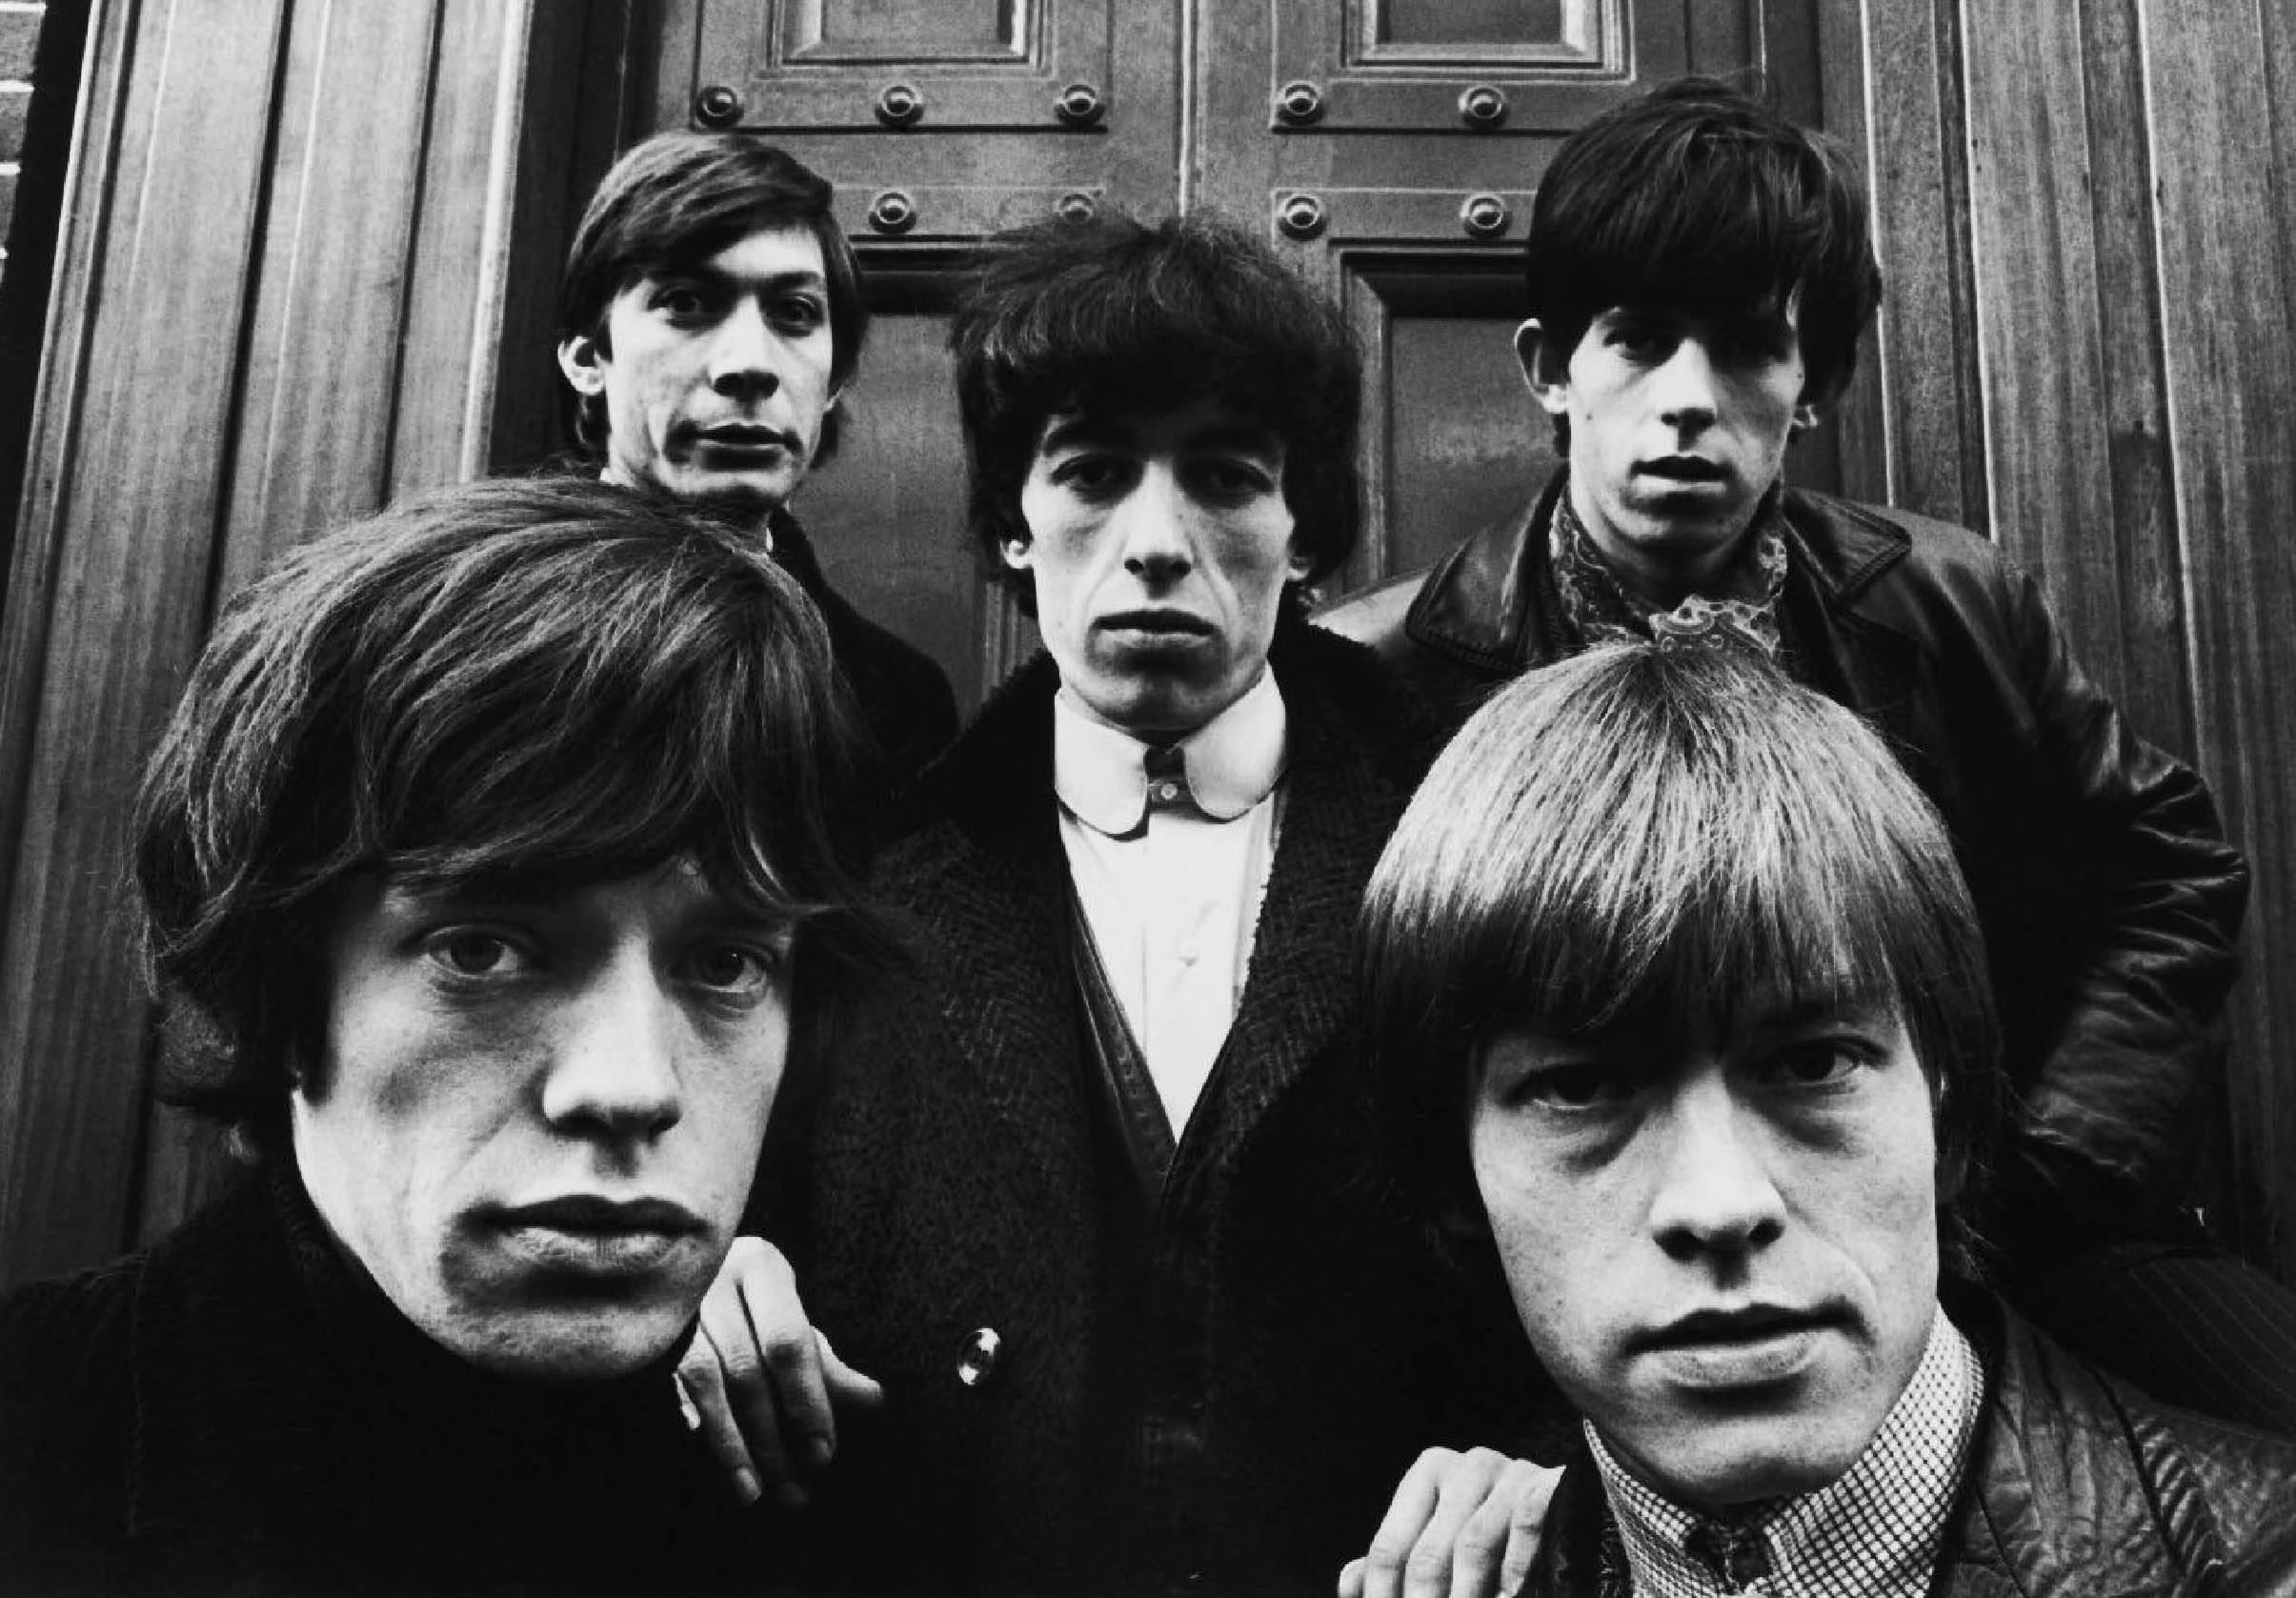 The Rolling Stones in front of St. George's Church in Hanover Square, London in 1963. Photographed by Terry O'Neill.

Edition of 50
16 x 20 inches
(More sizes available)

Terry O’Neill began his photography career in 1958 and gained notoriety